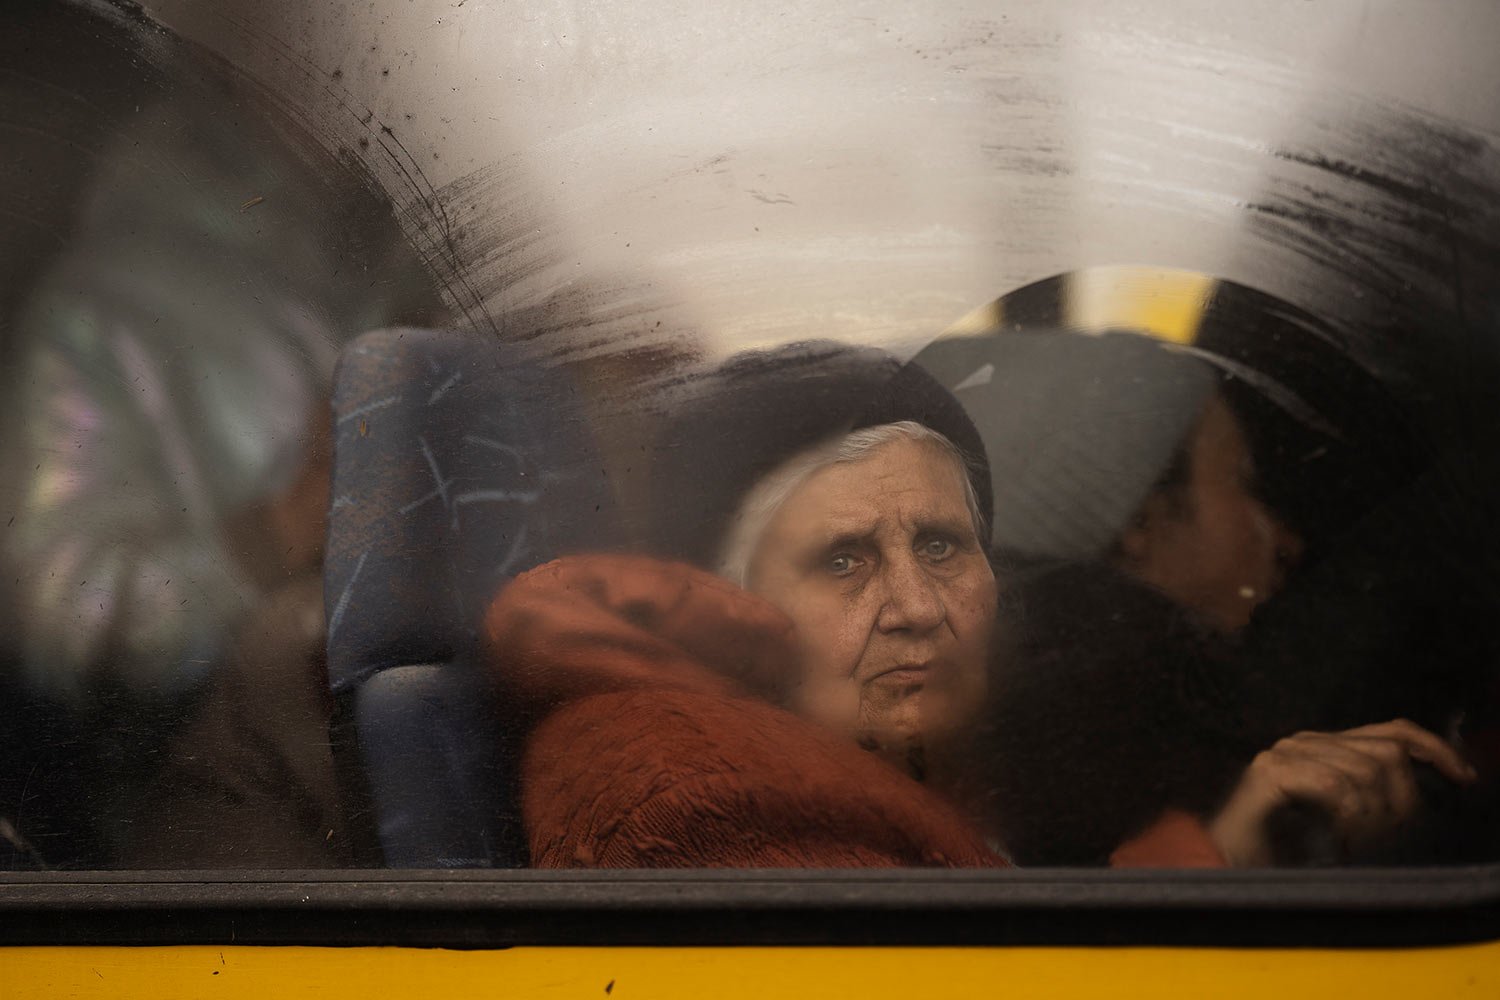  An internally displaced elderly woman from Mariupol looks out of a bus after window arriving at a refugee center fleeing from the Russian attacks, in Zaporizhzhia, Ukraine, Thursday, April 21, 2022. (AP Photo/Leo Correa) 